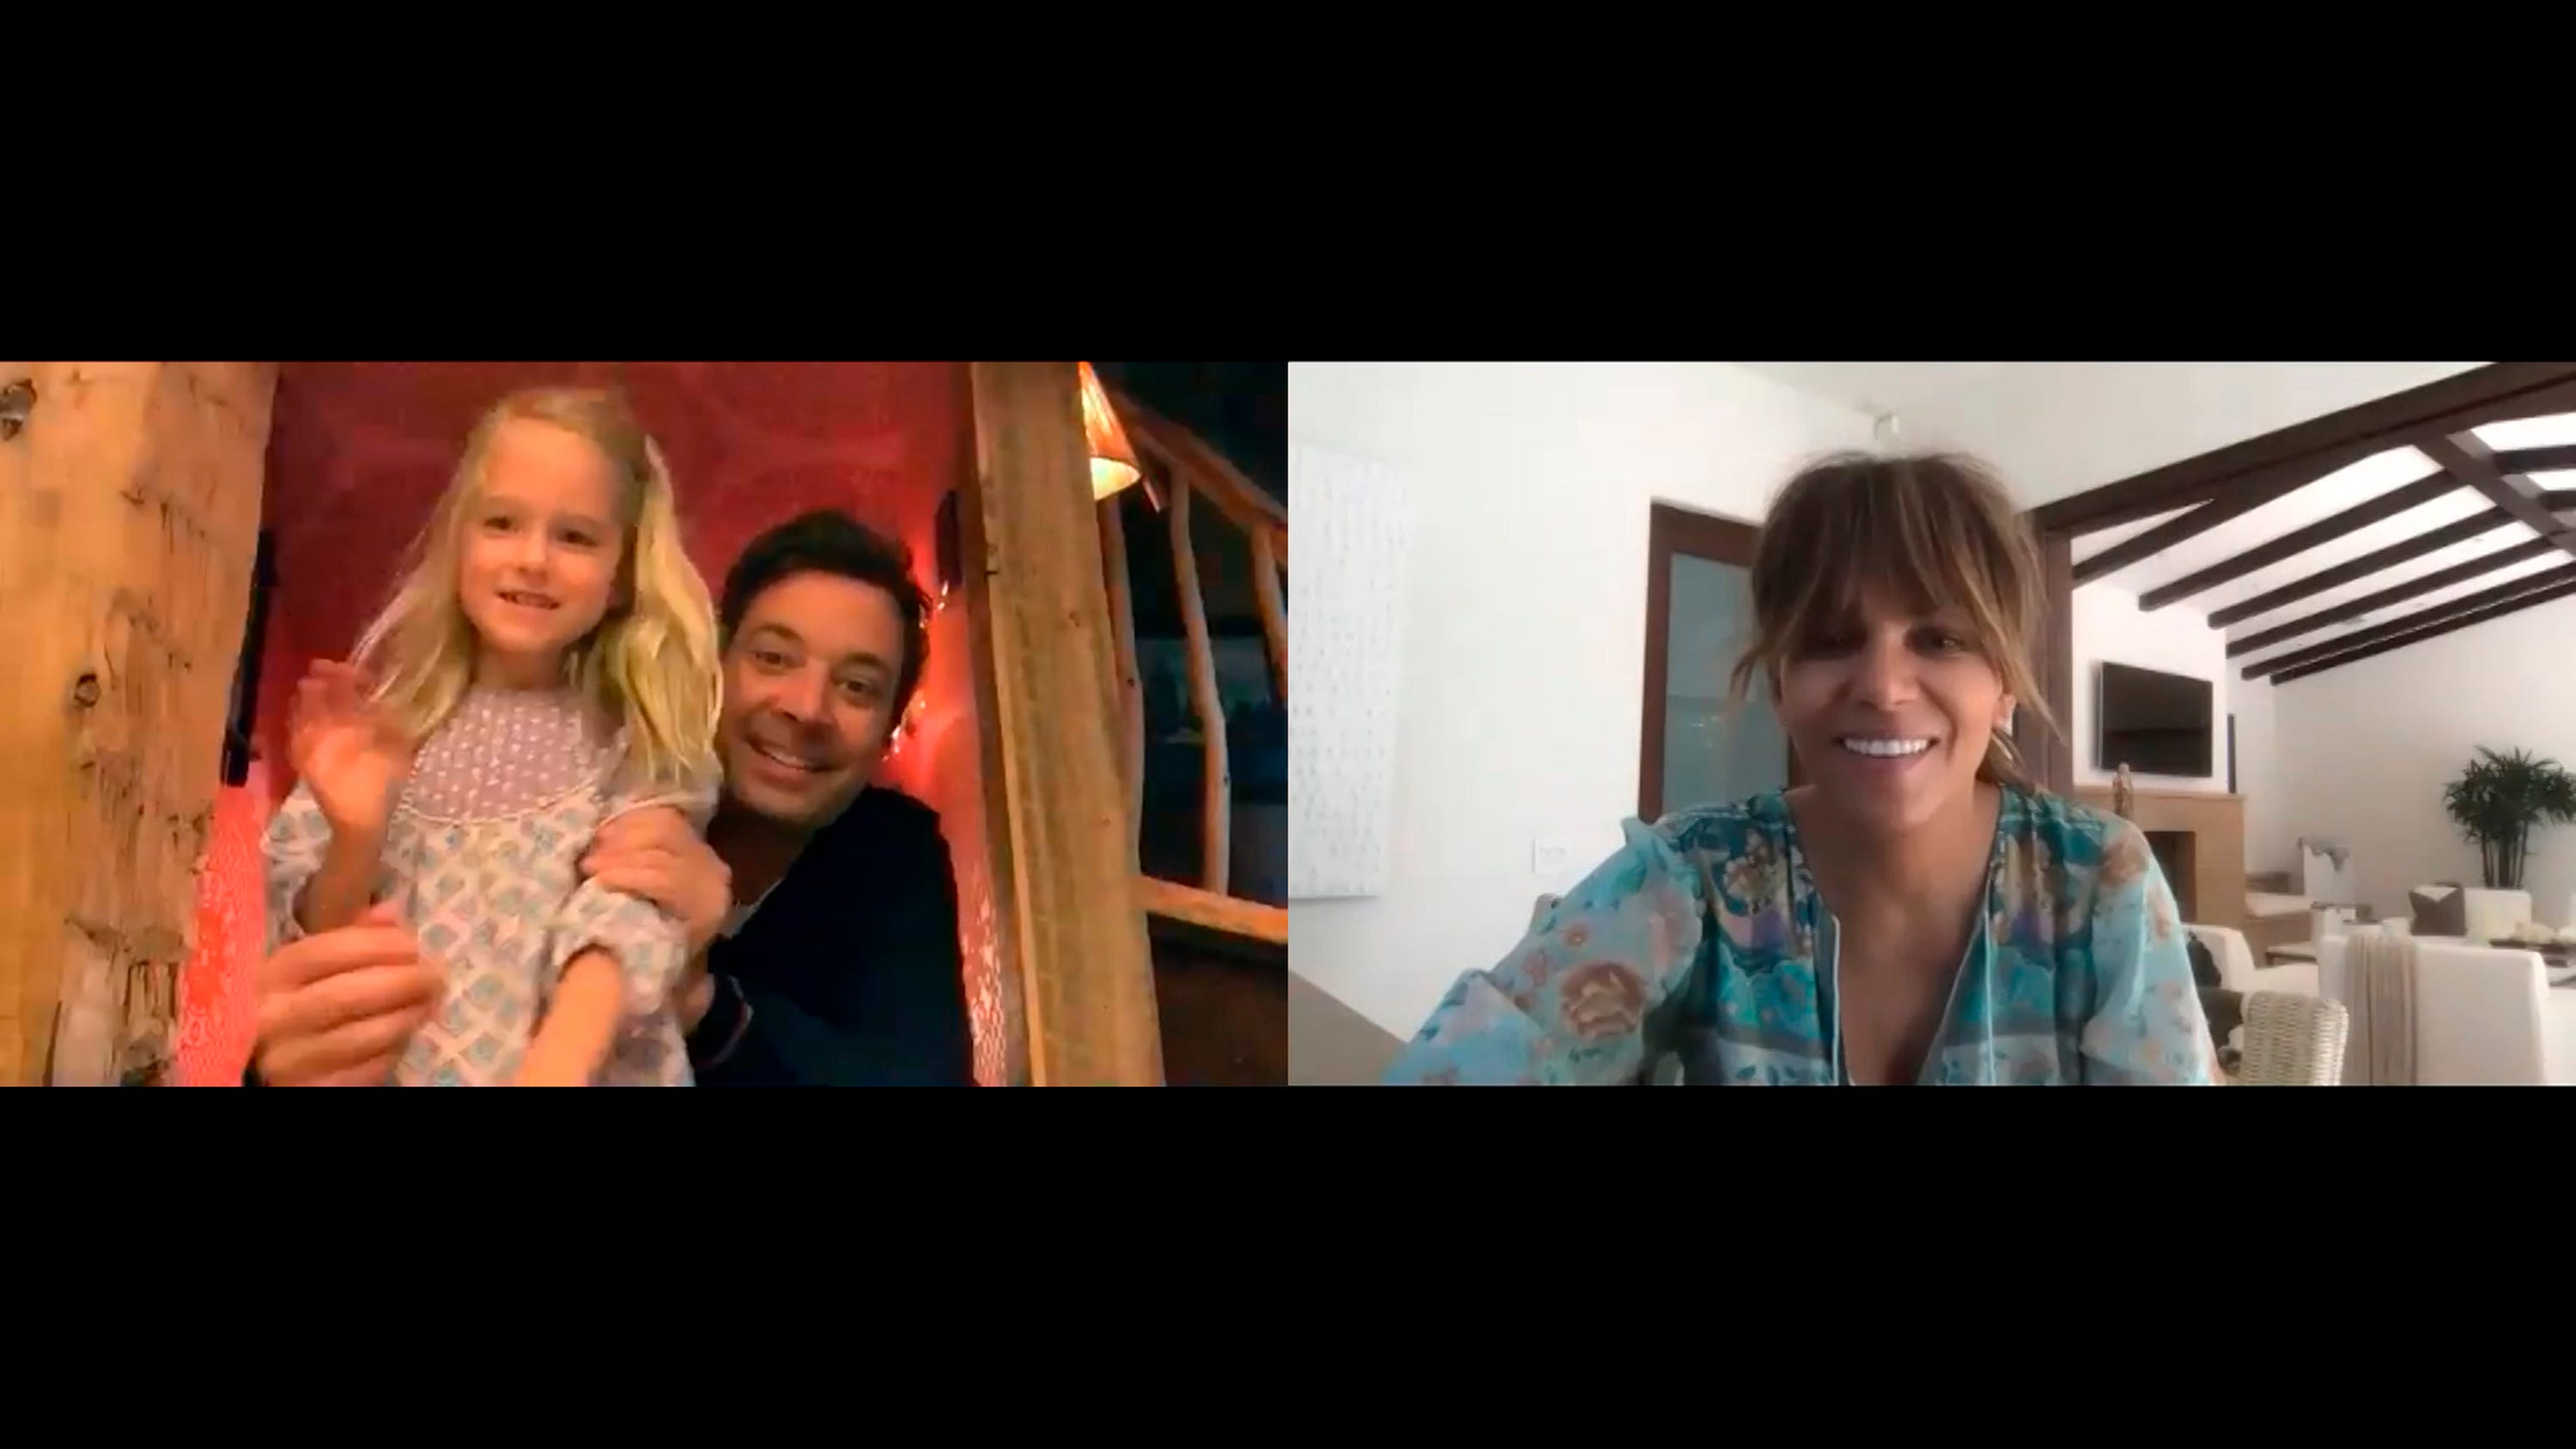 Jimmy Fallon and his daughter video chat with Halle Berry on the April 21 episode of "The Tonight Show Starring Jimmy Fallon."